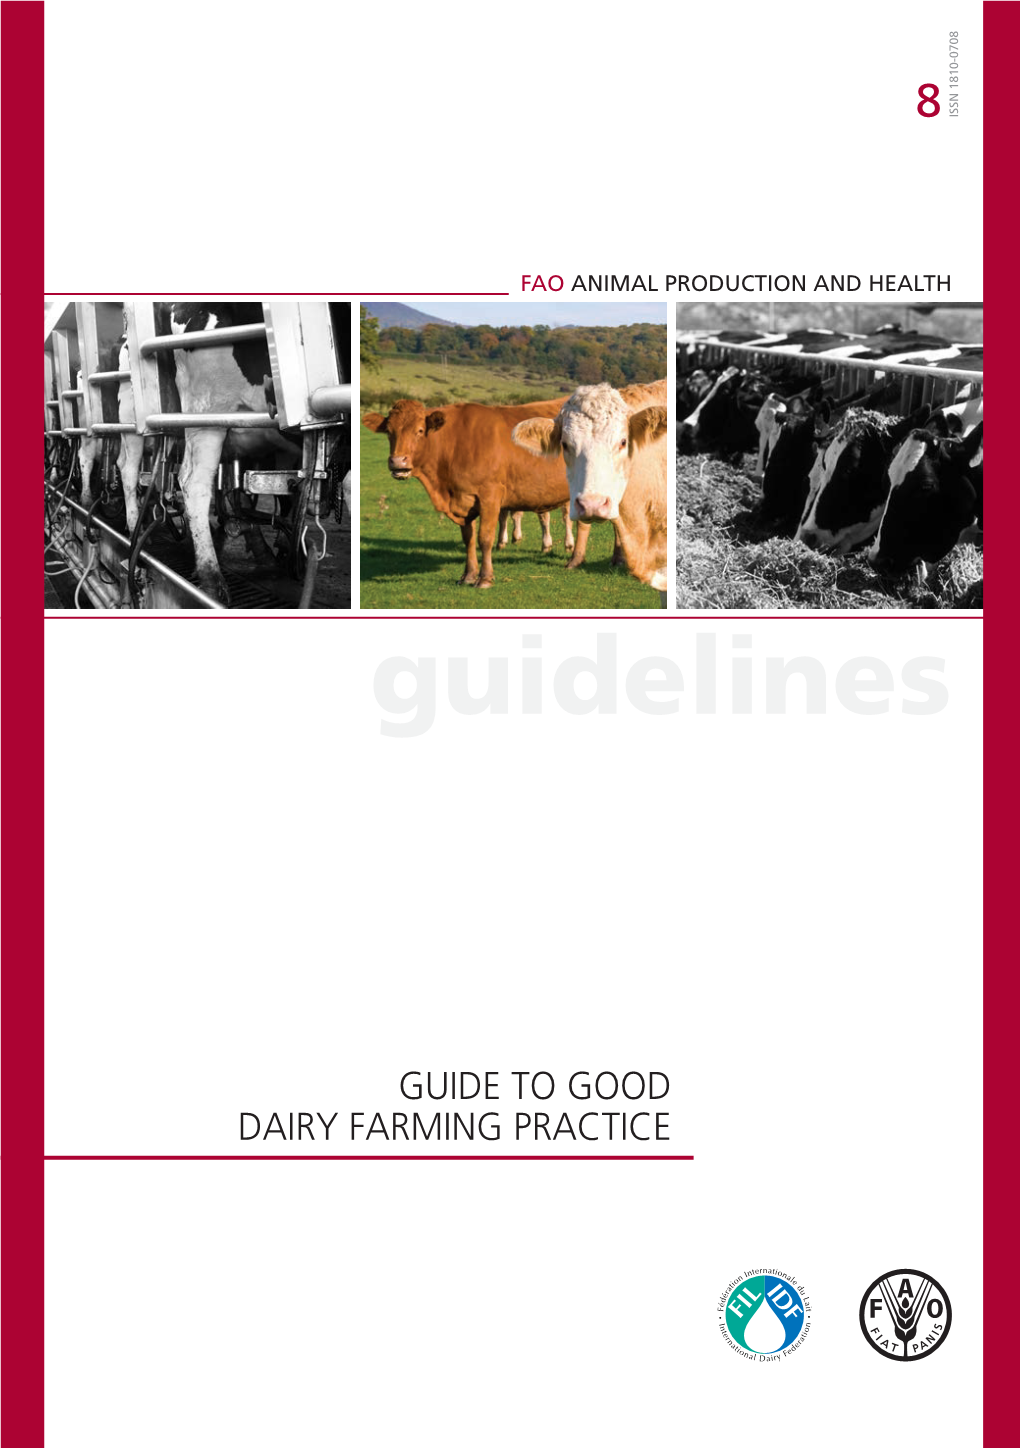 Guide to Good Dairy Farming Practice Has Been Developed by an IDF/FAO ...